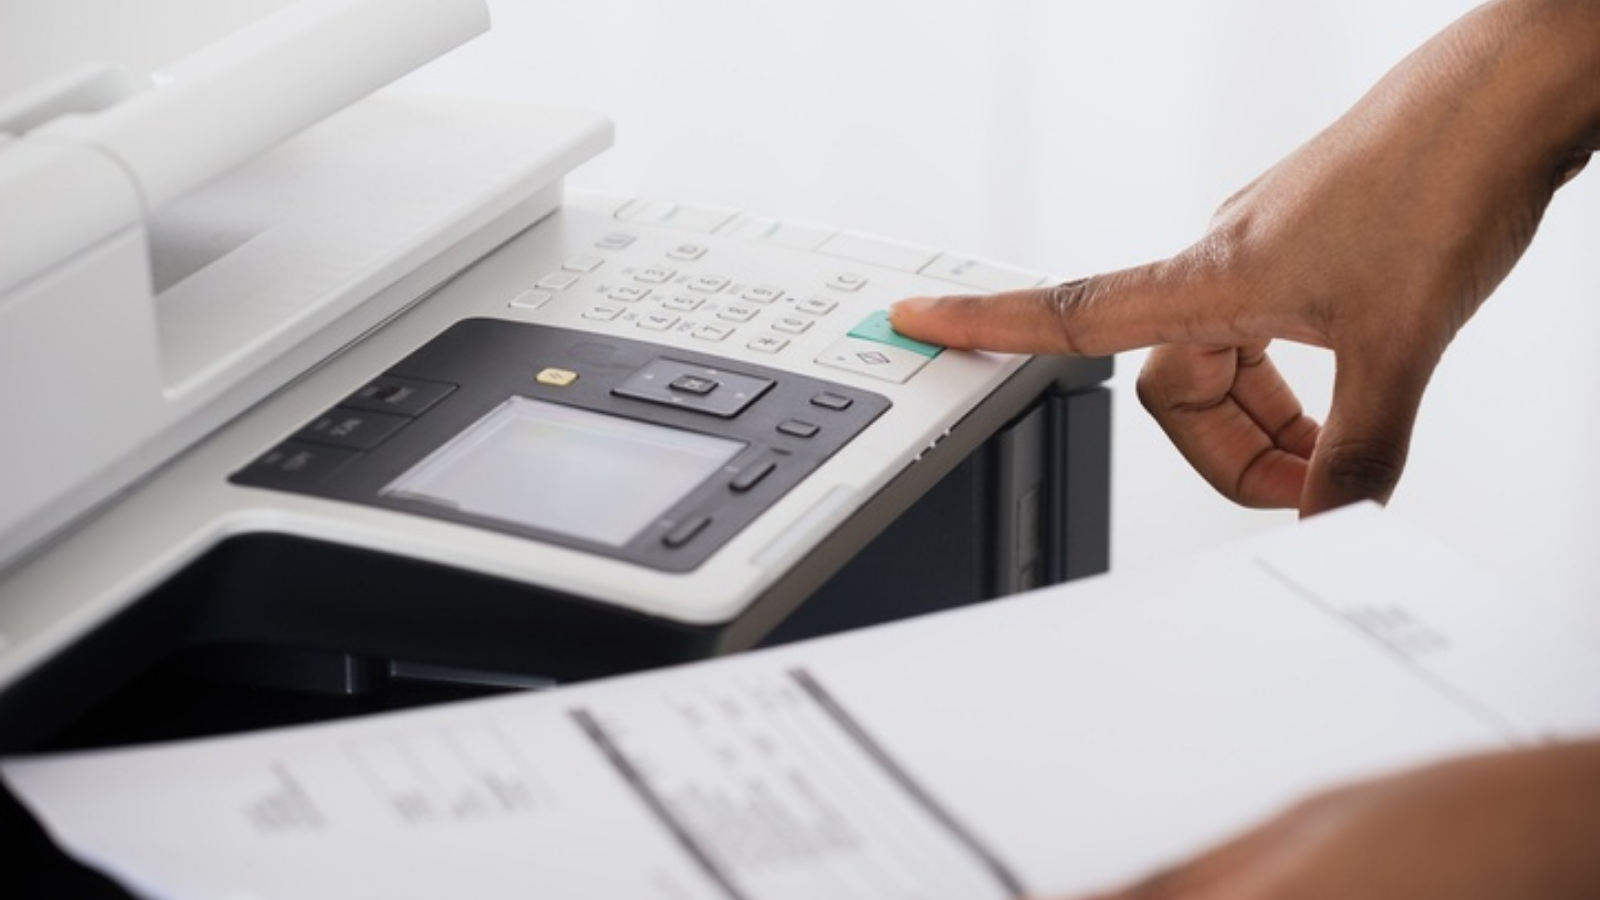 Ways Your Business Can Save on Print Costs